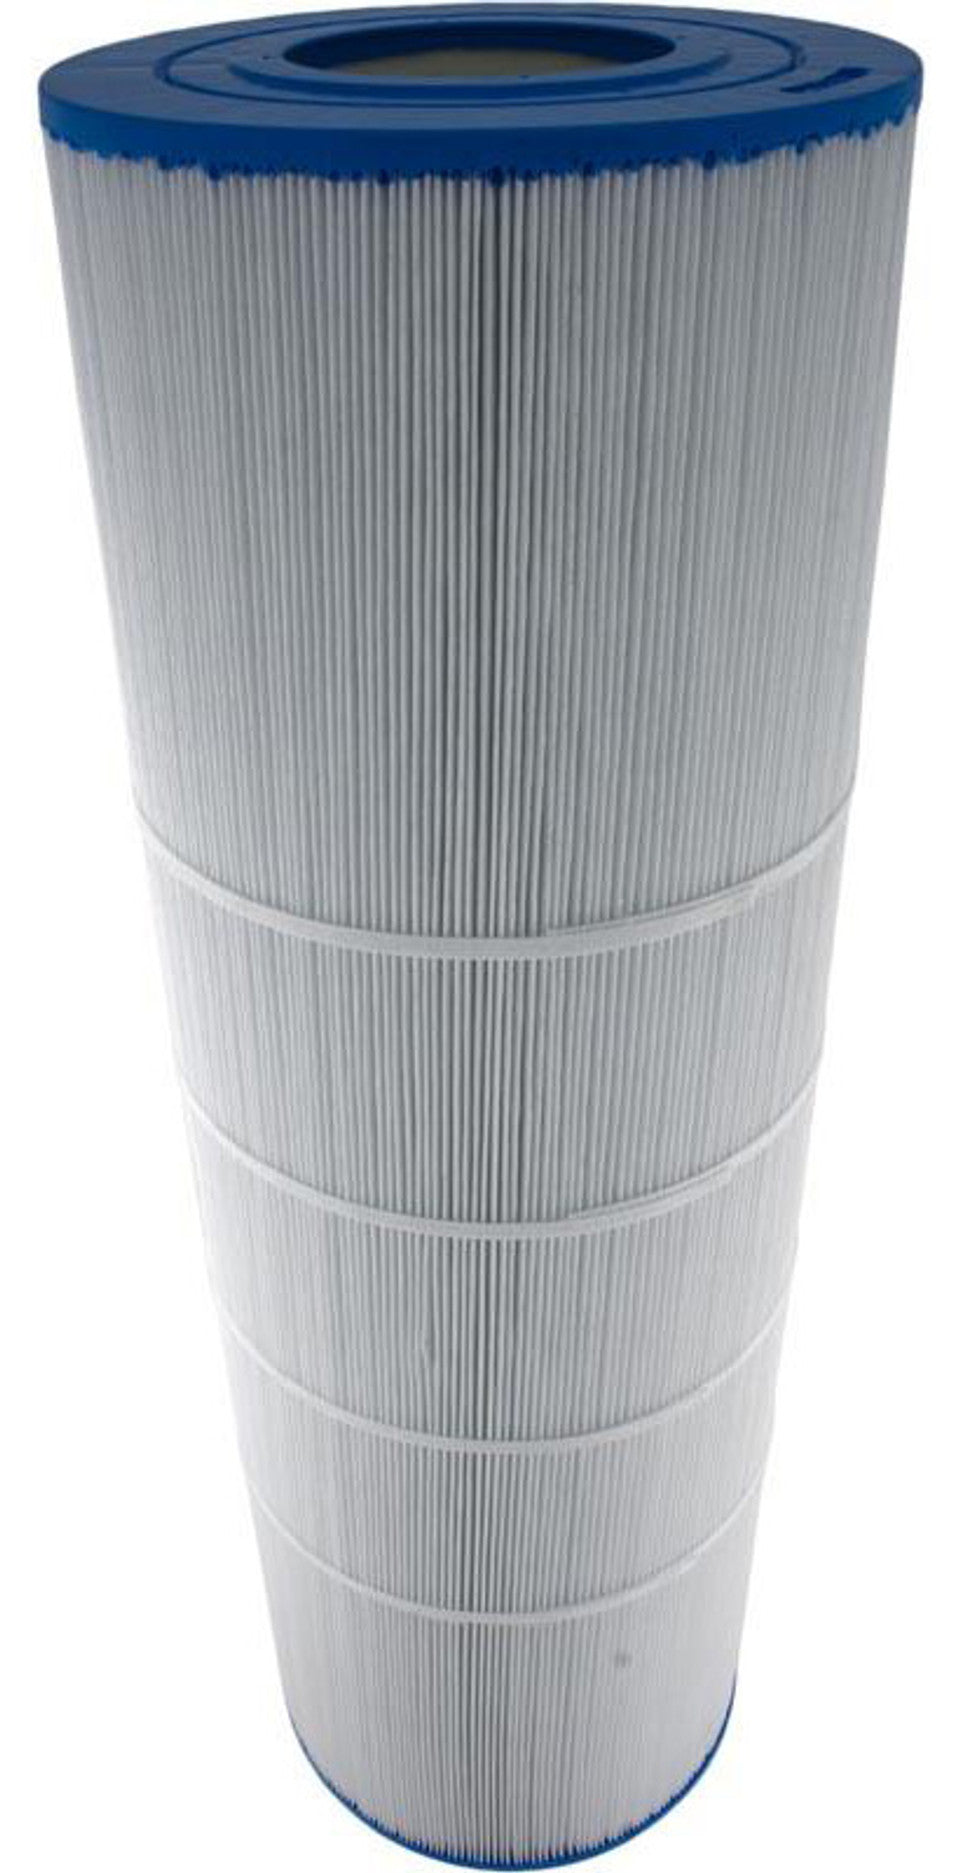 Darlly 81756 Filter Cartridge Replaces PA175, FC-1294 and C-8417